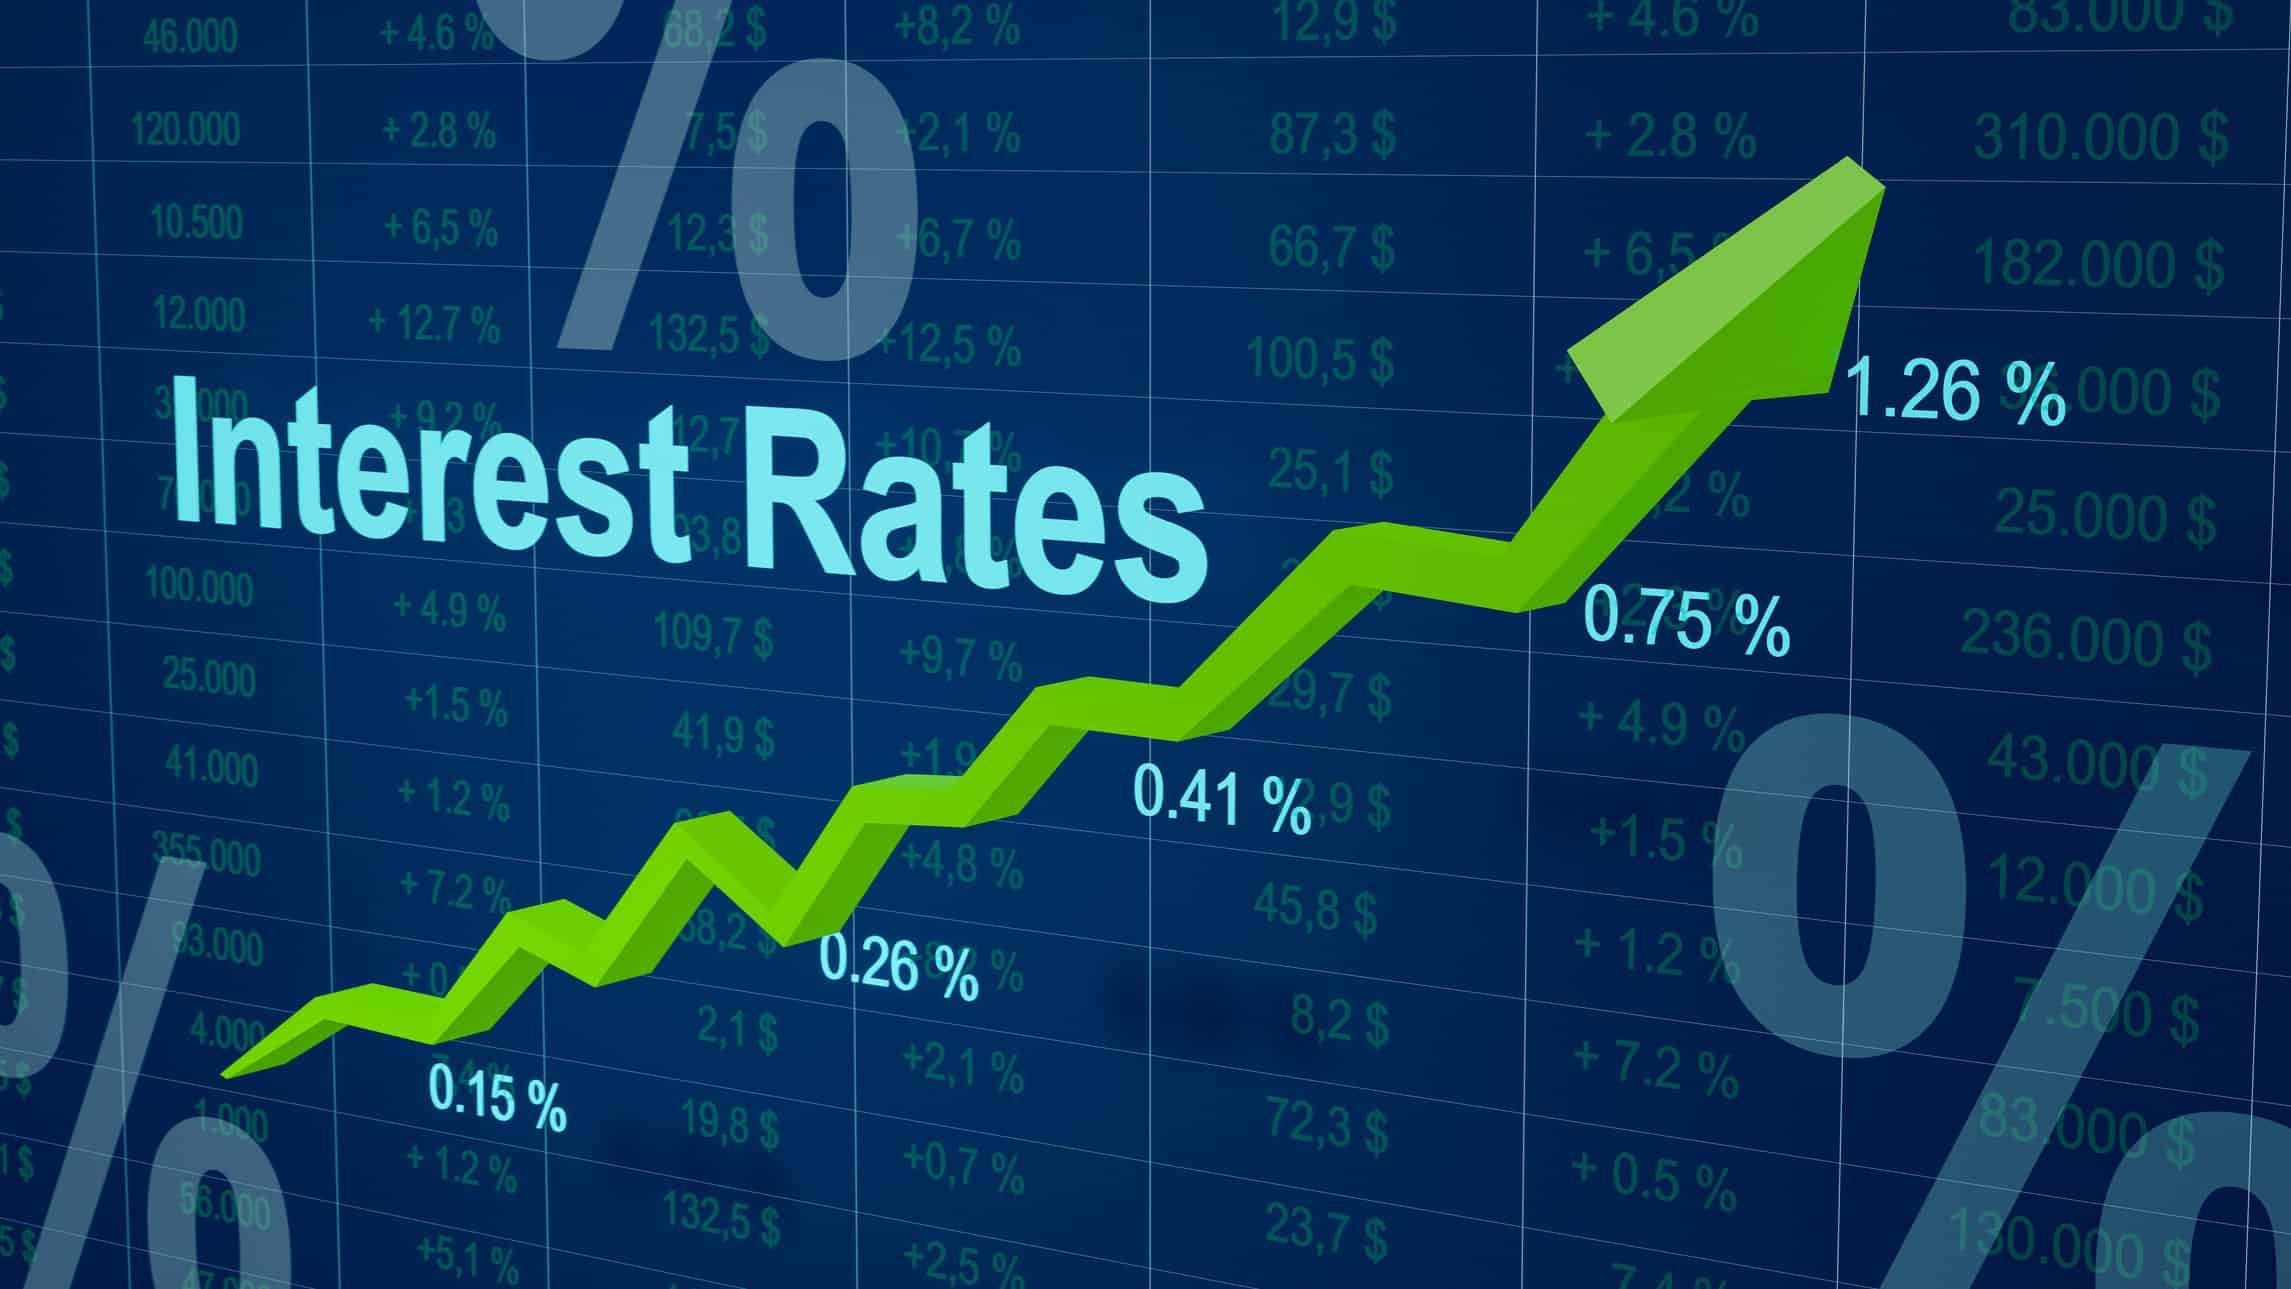 Is there a relationship between interest rates and inflation rates?